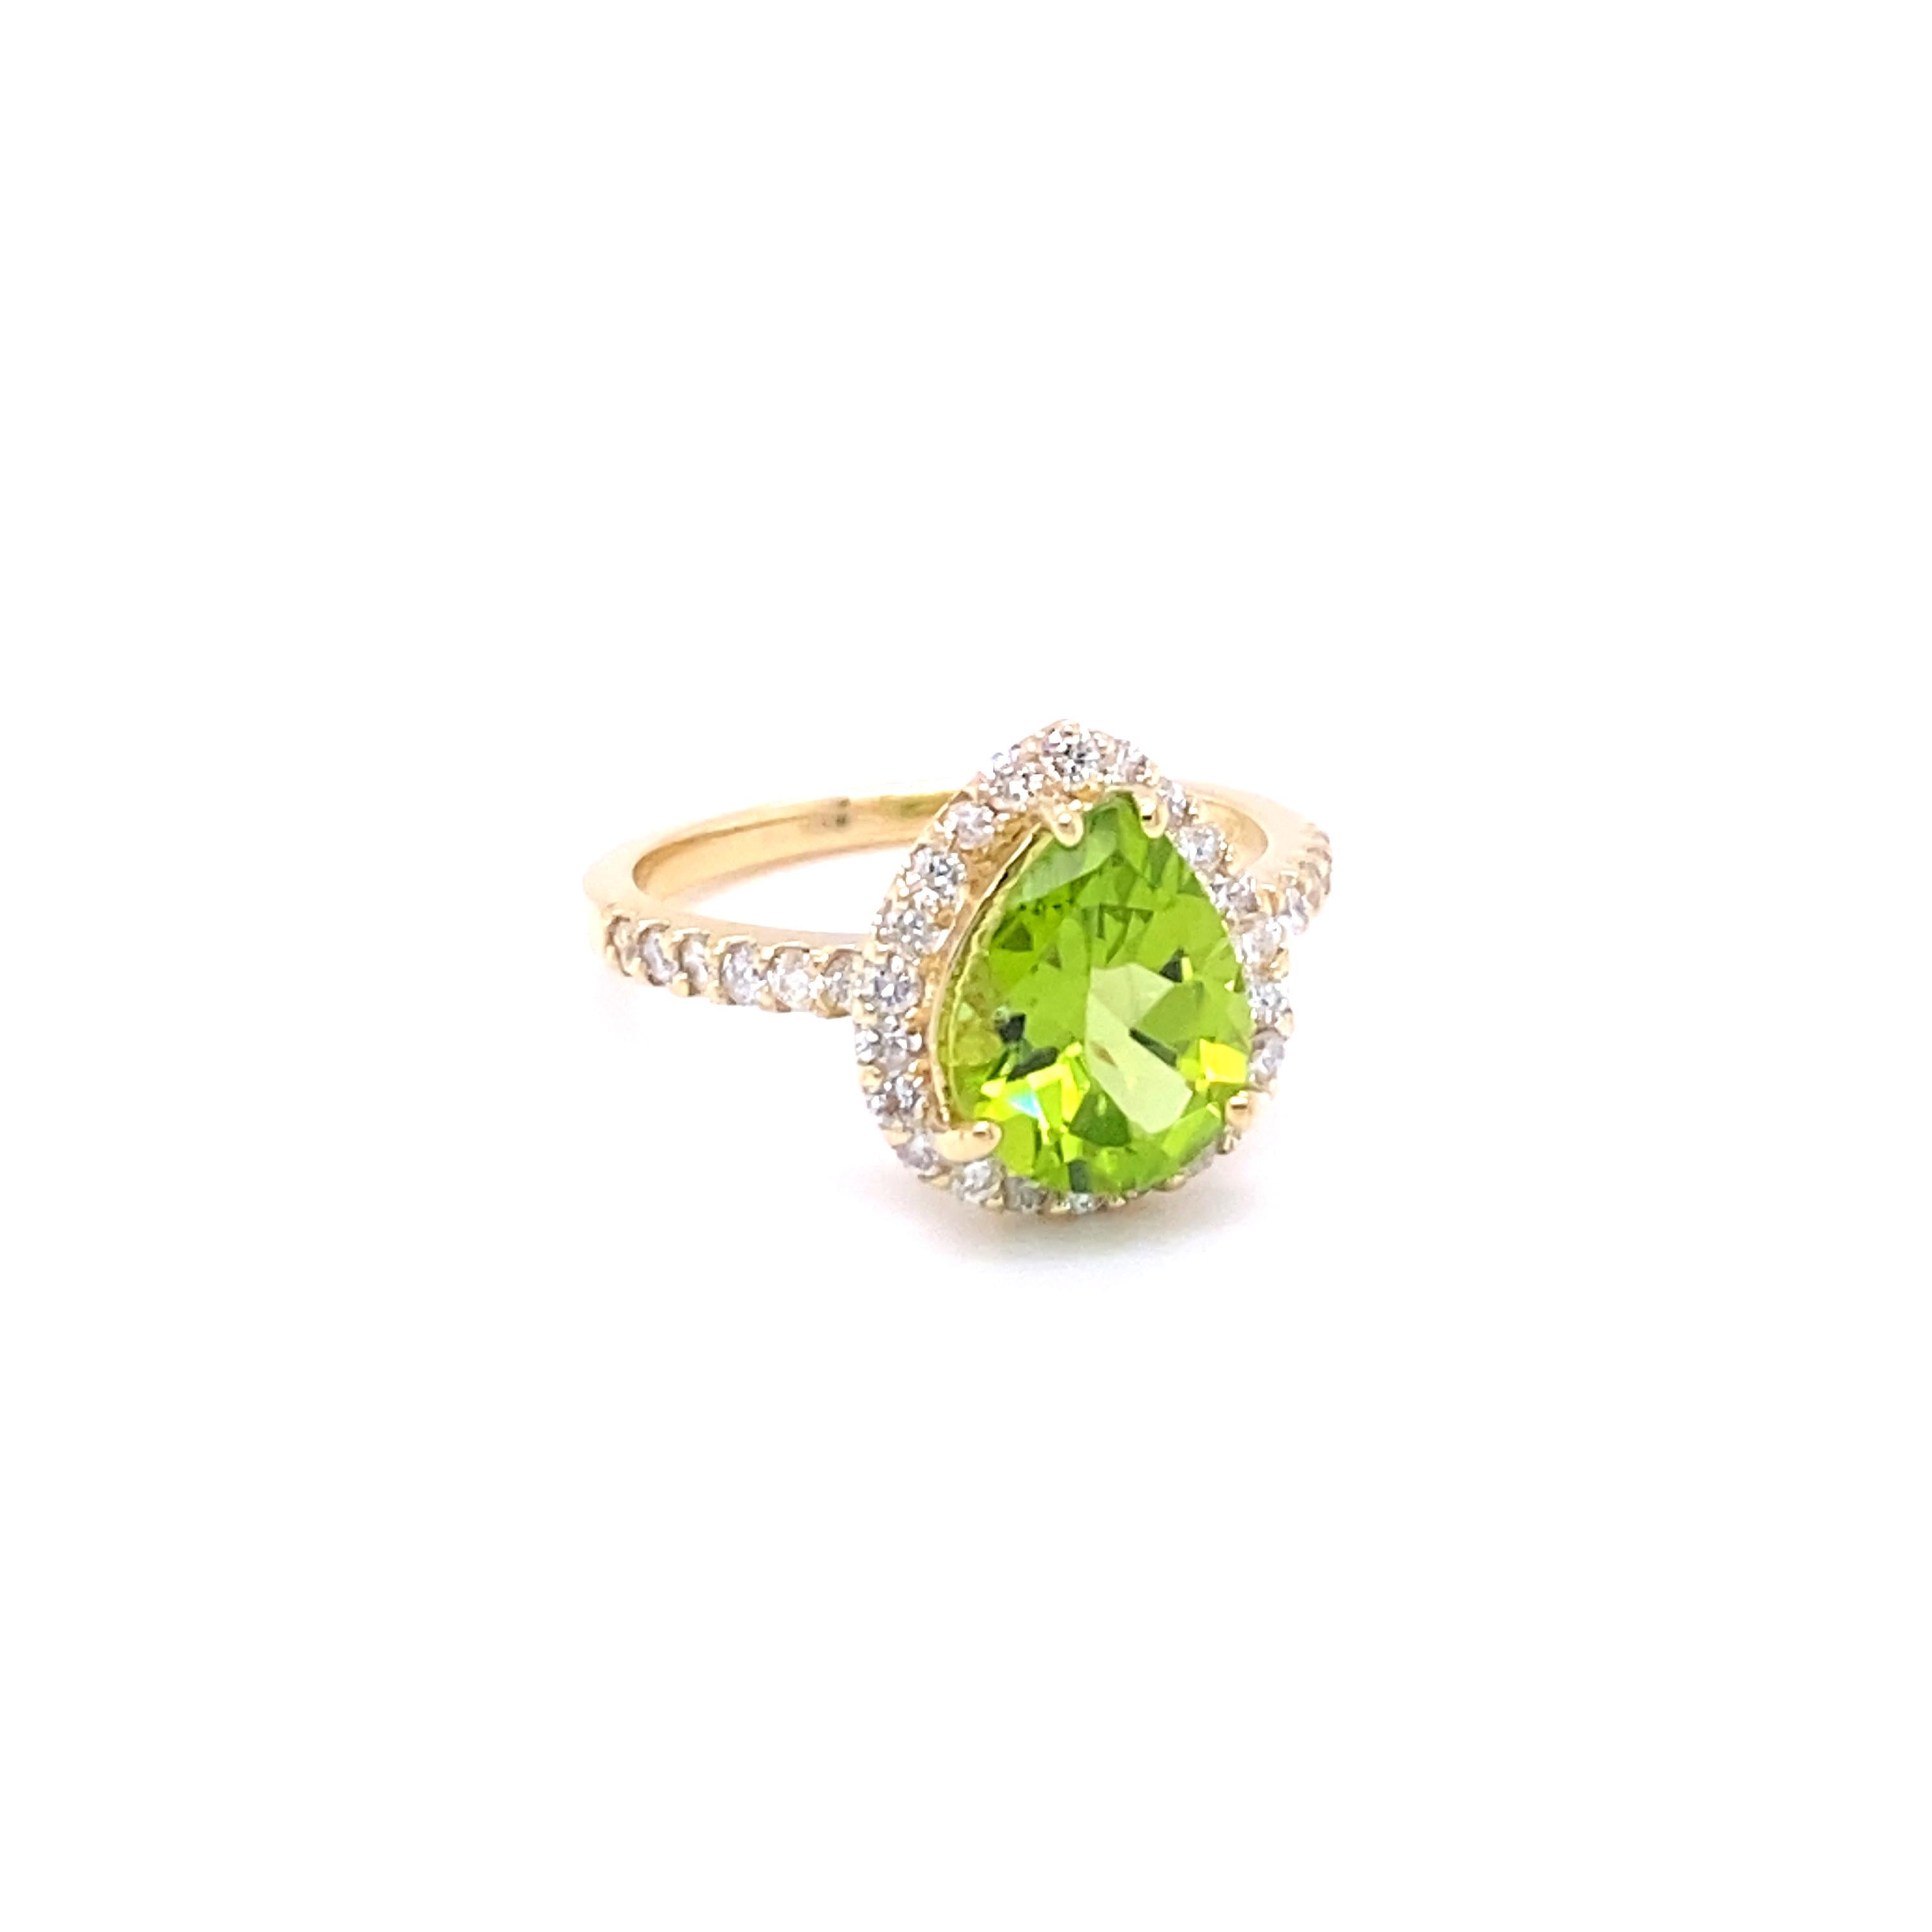 This beautiful Ring has a Pear Cut Peridot in the center that weighs 2.25 Carats. The ring is surrounded by a Halo of 34 Rounds Cut Diamonds that weigh 0.57 Carats. The Total Carat weight of the ring is 2.82 Carats. The Diamonds have a Clarity of